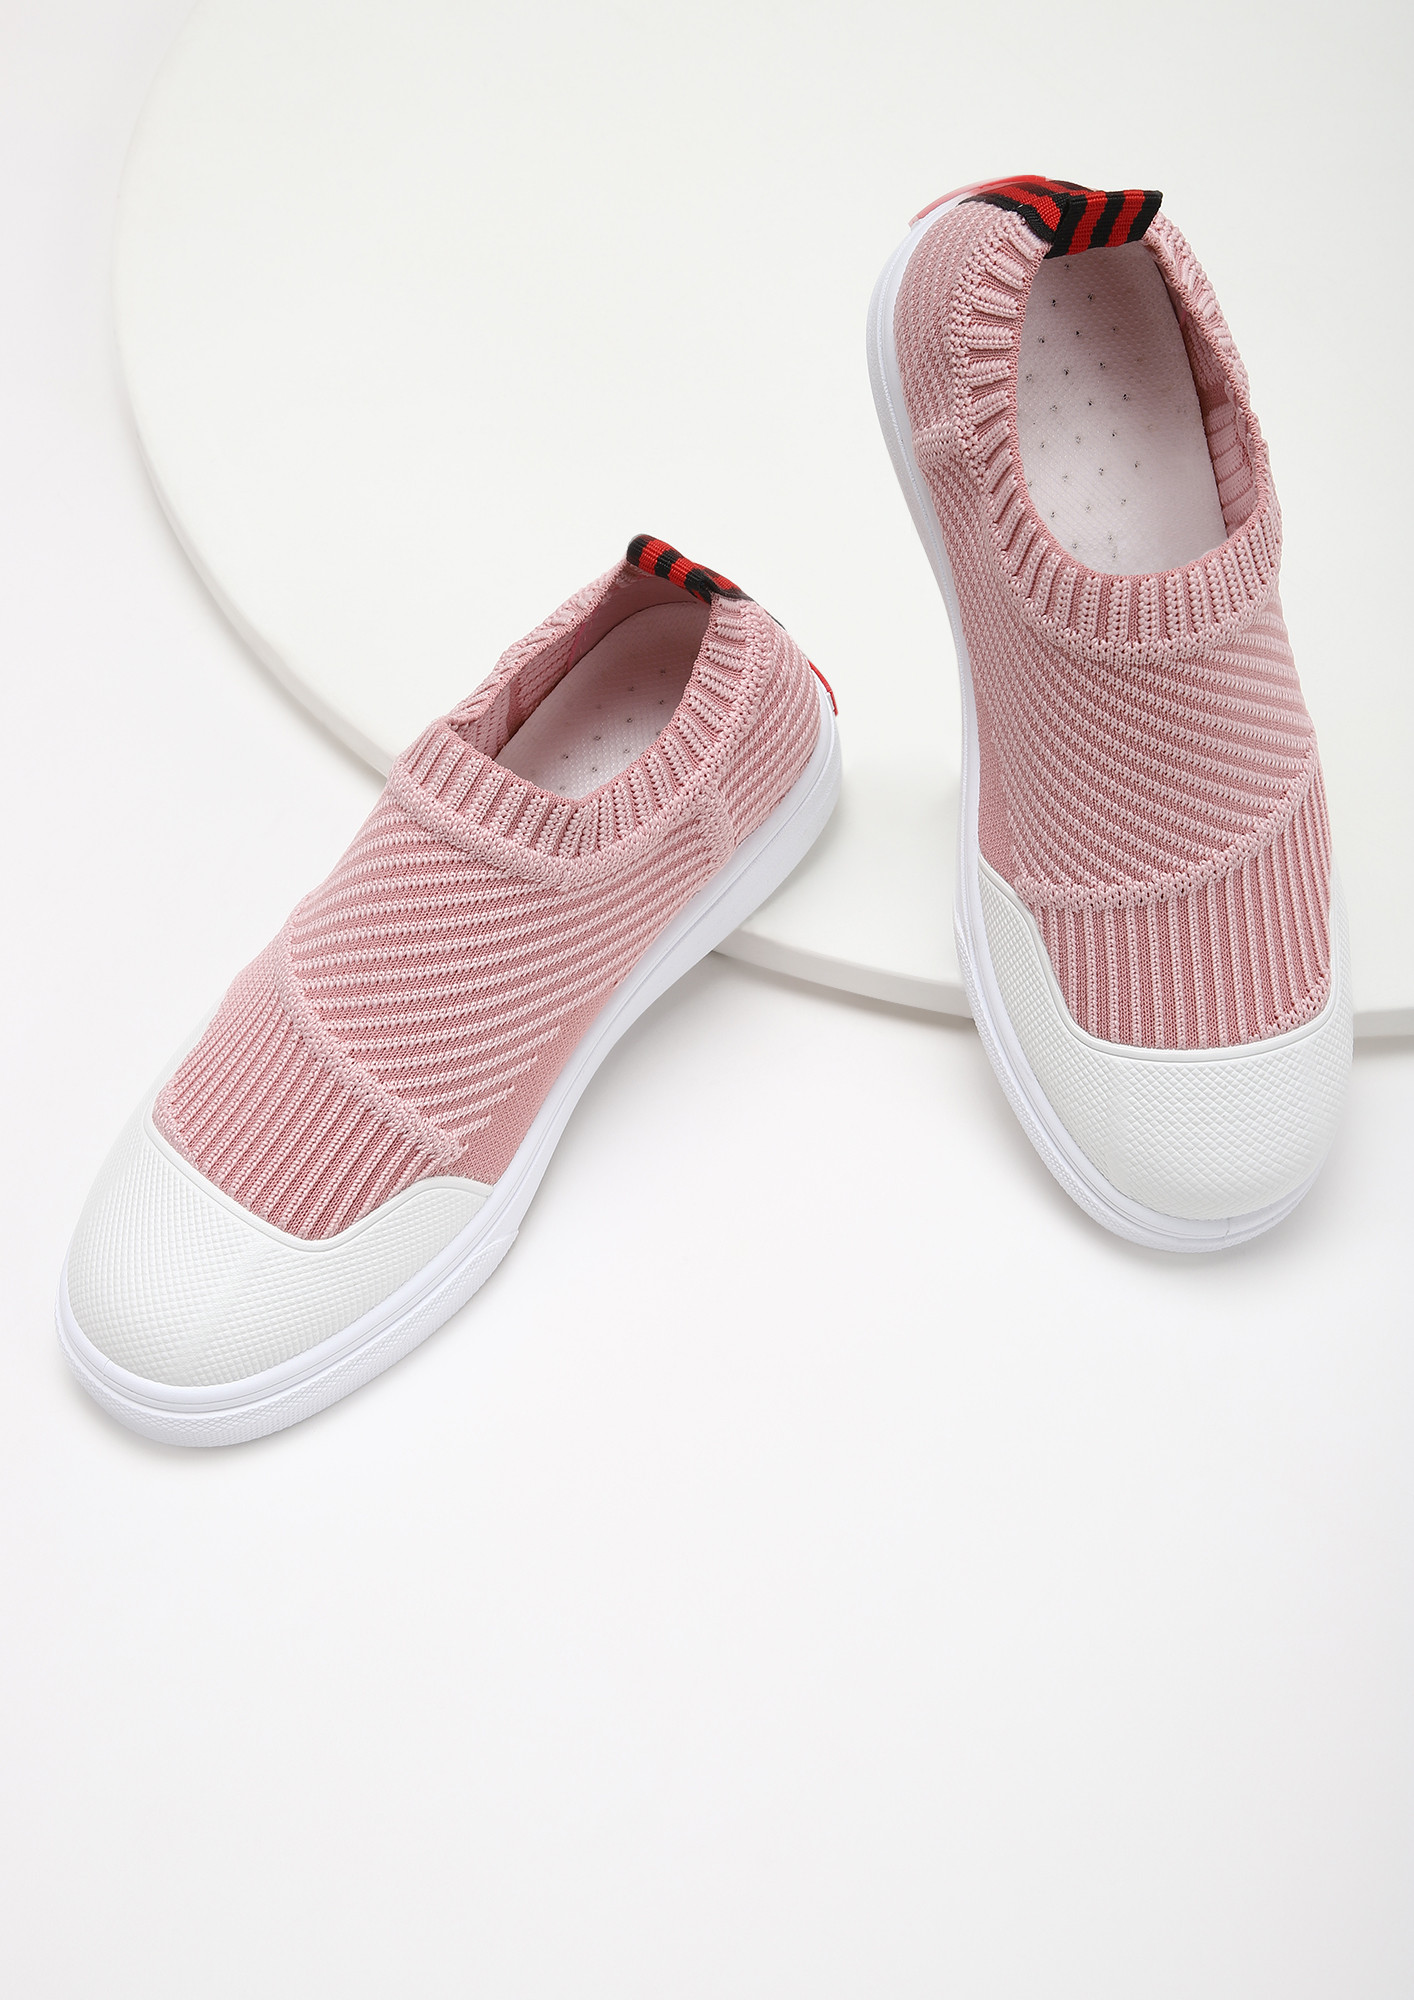 COMFY FEET PINK CASUAL SHOES